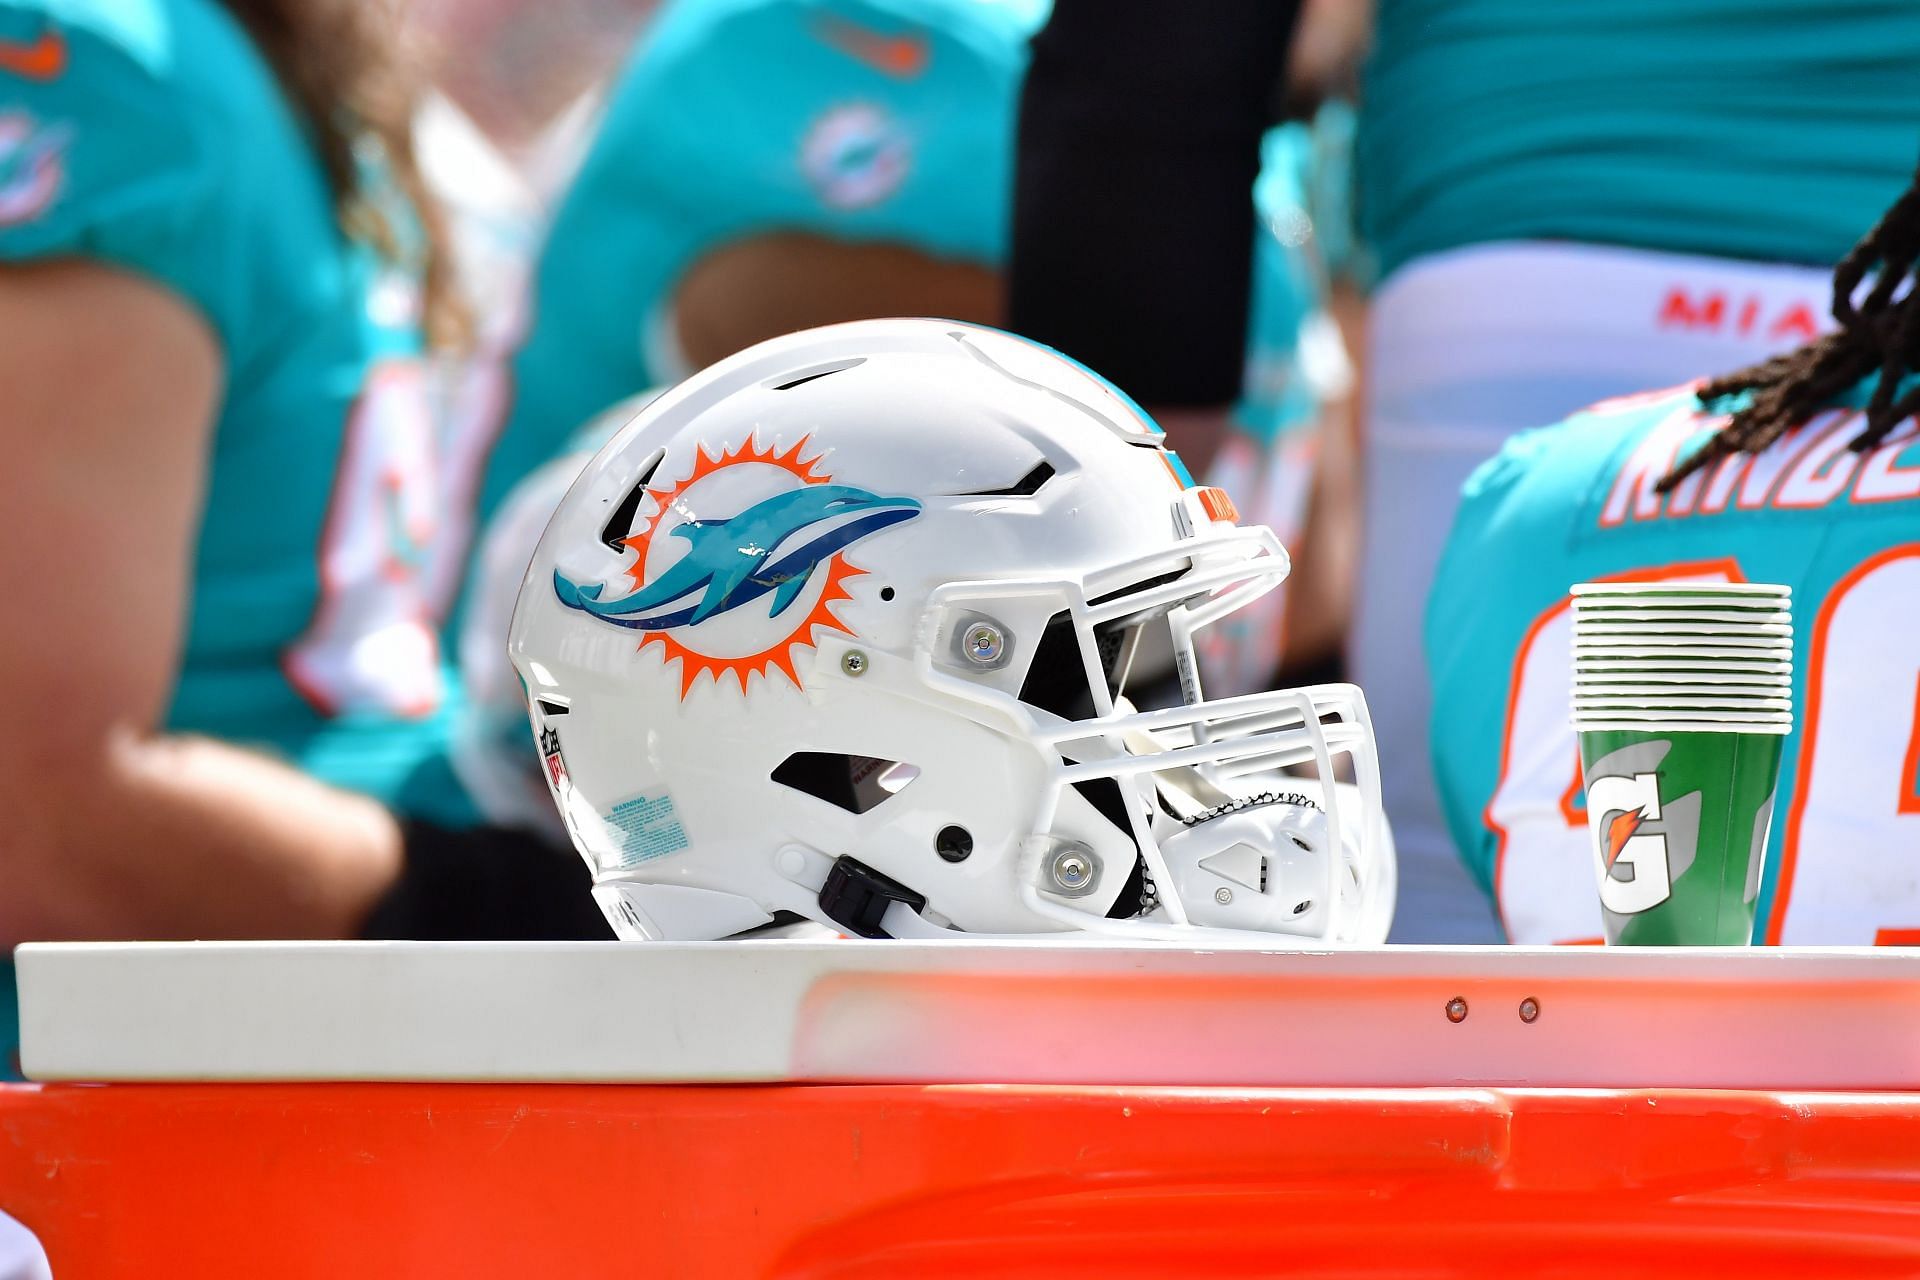 Miami Dolphins vs. Tampa Bay Buccaneers